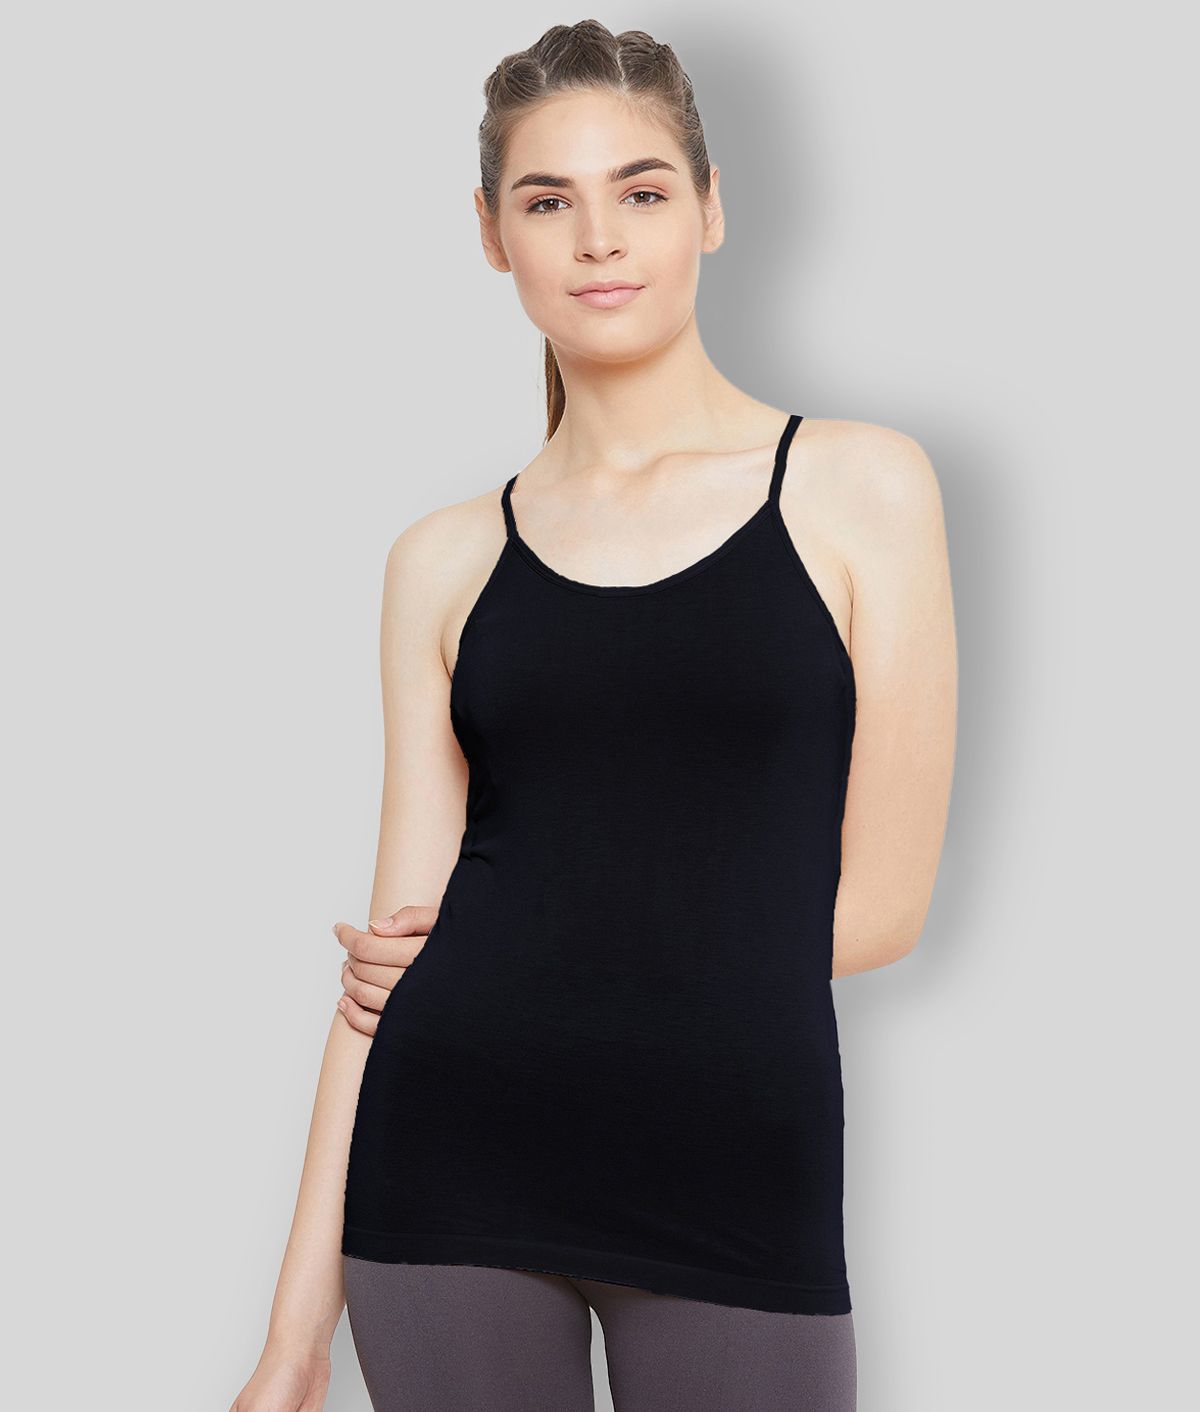     			Outflits - Black Cotton Women's Smoothing Cami ( Pack of 1 )